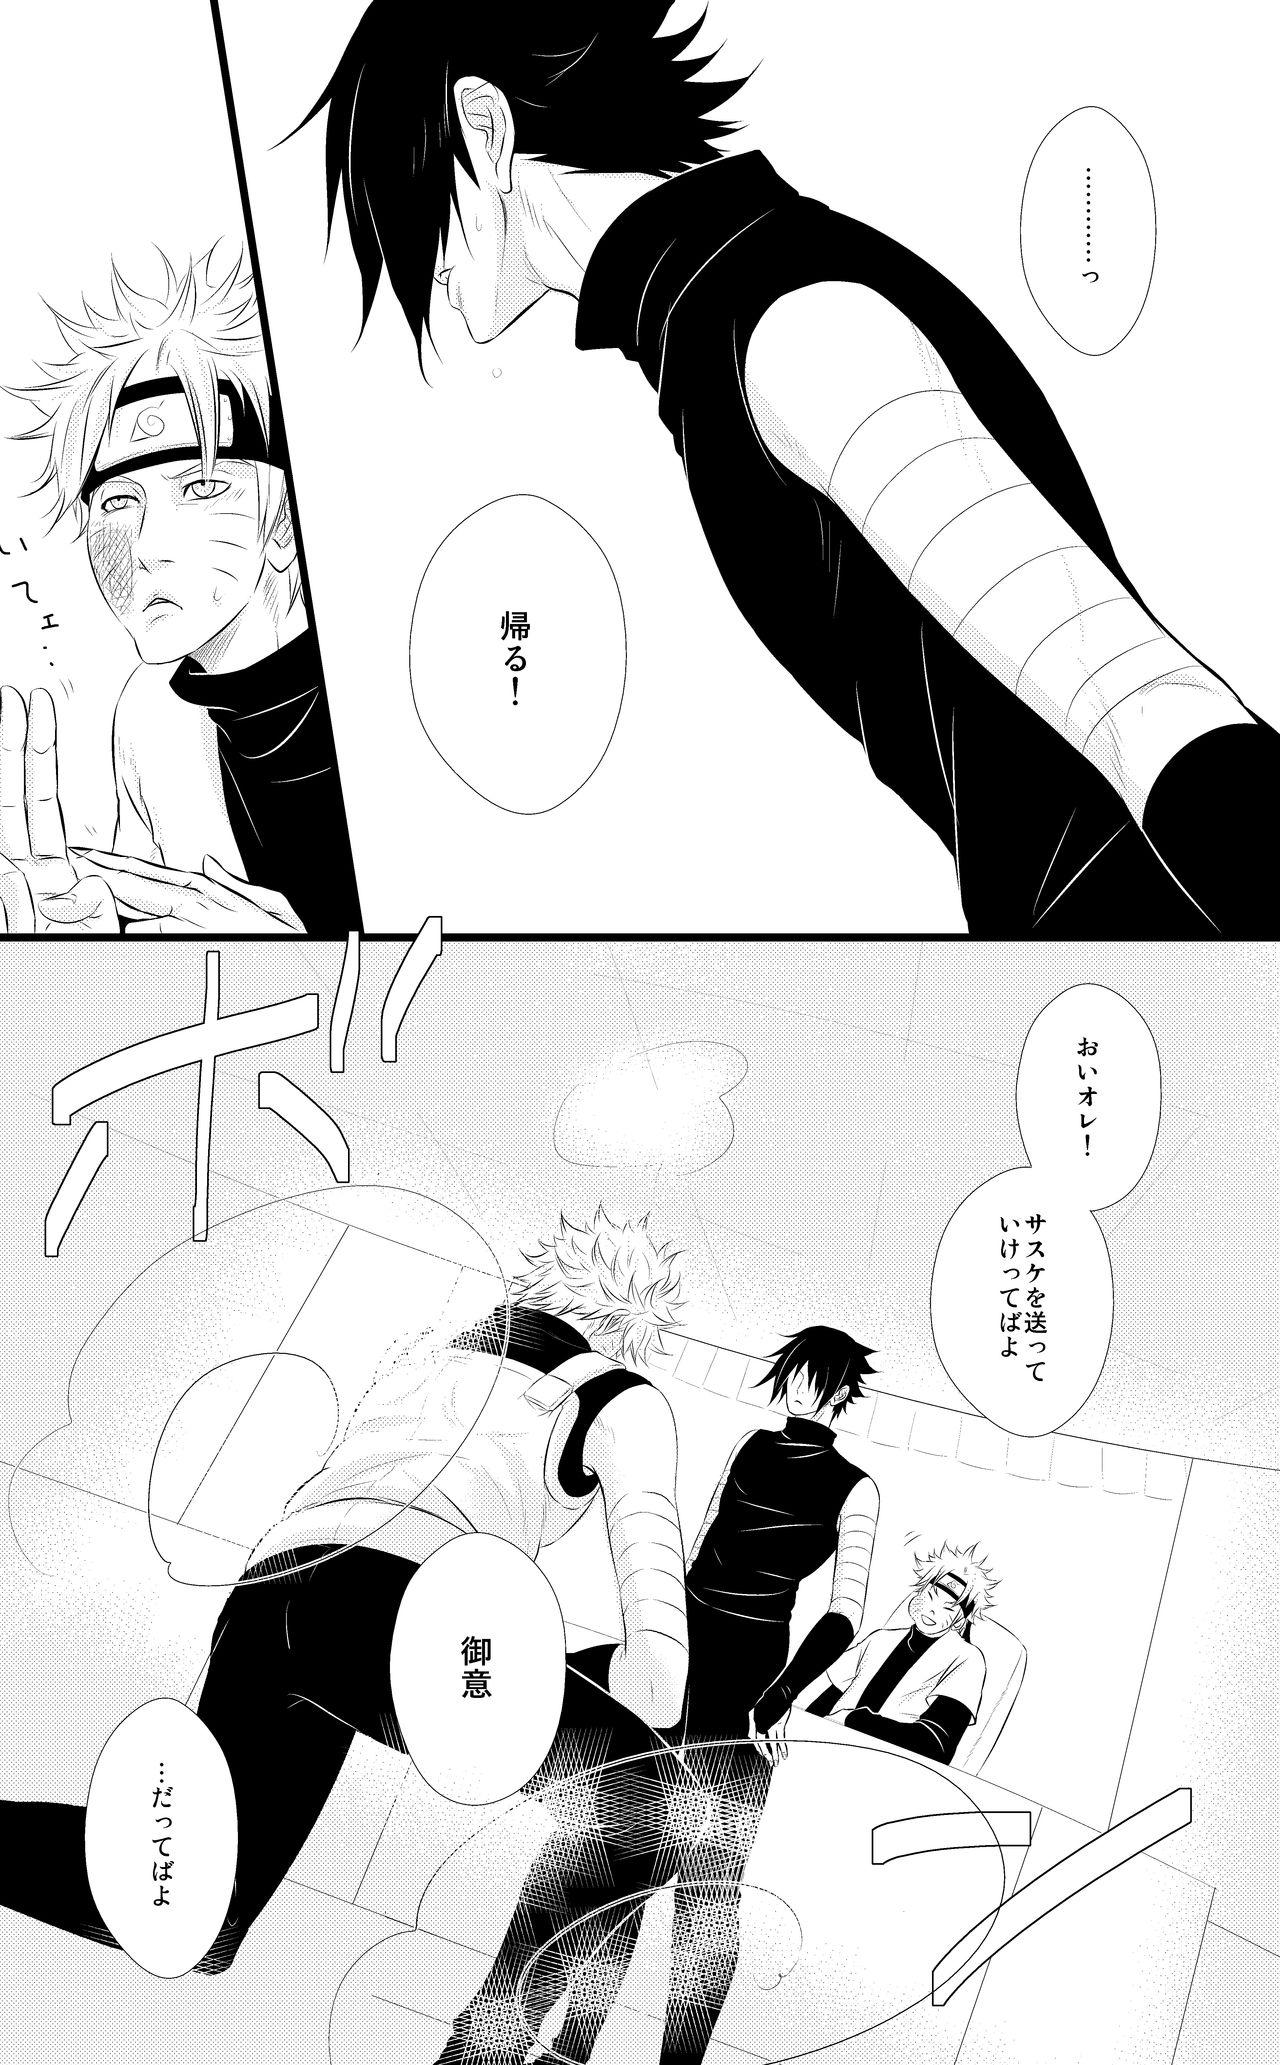 Camgirl DUMMY FAKE ROLLERS - Naruto Hardcoresex - Page 13